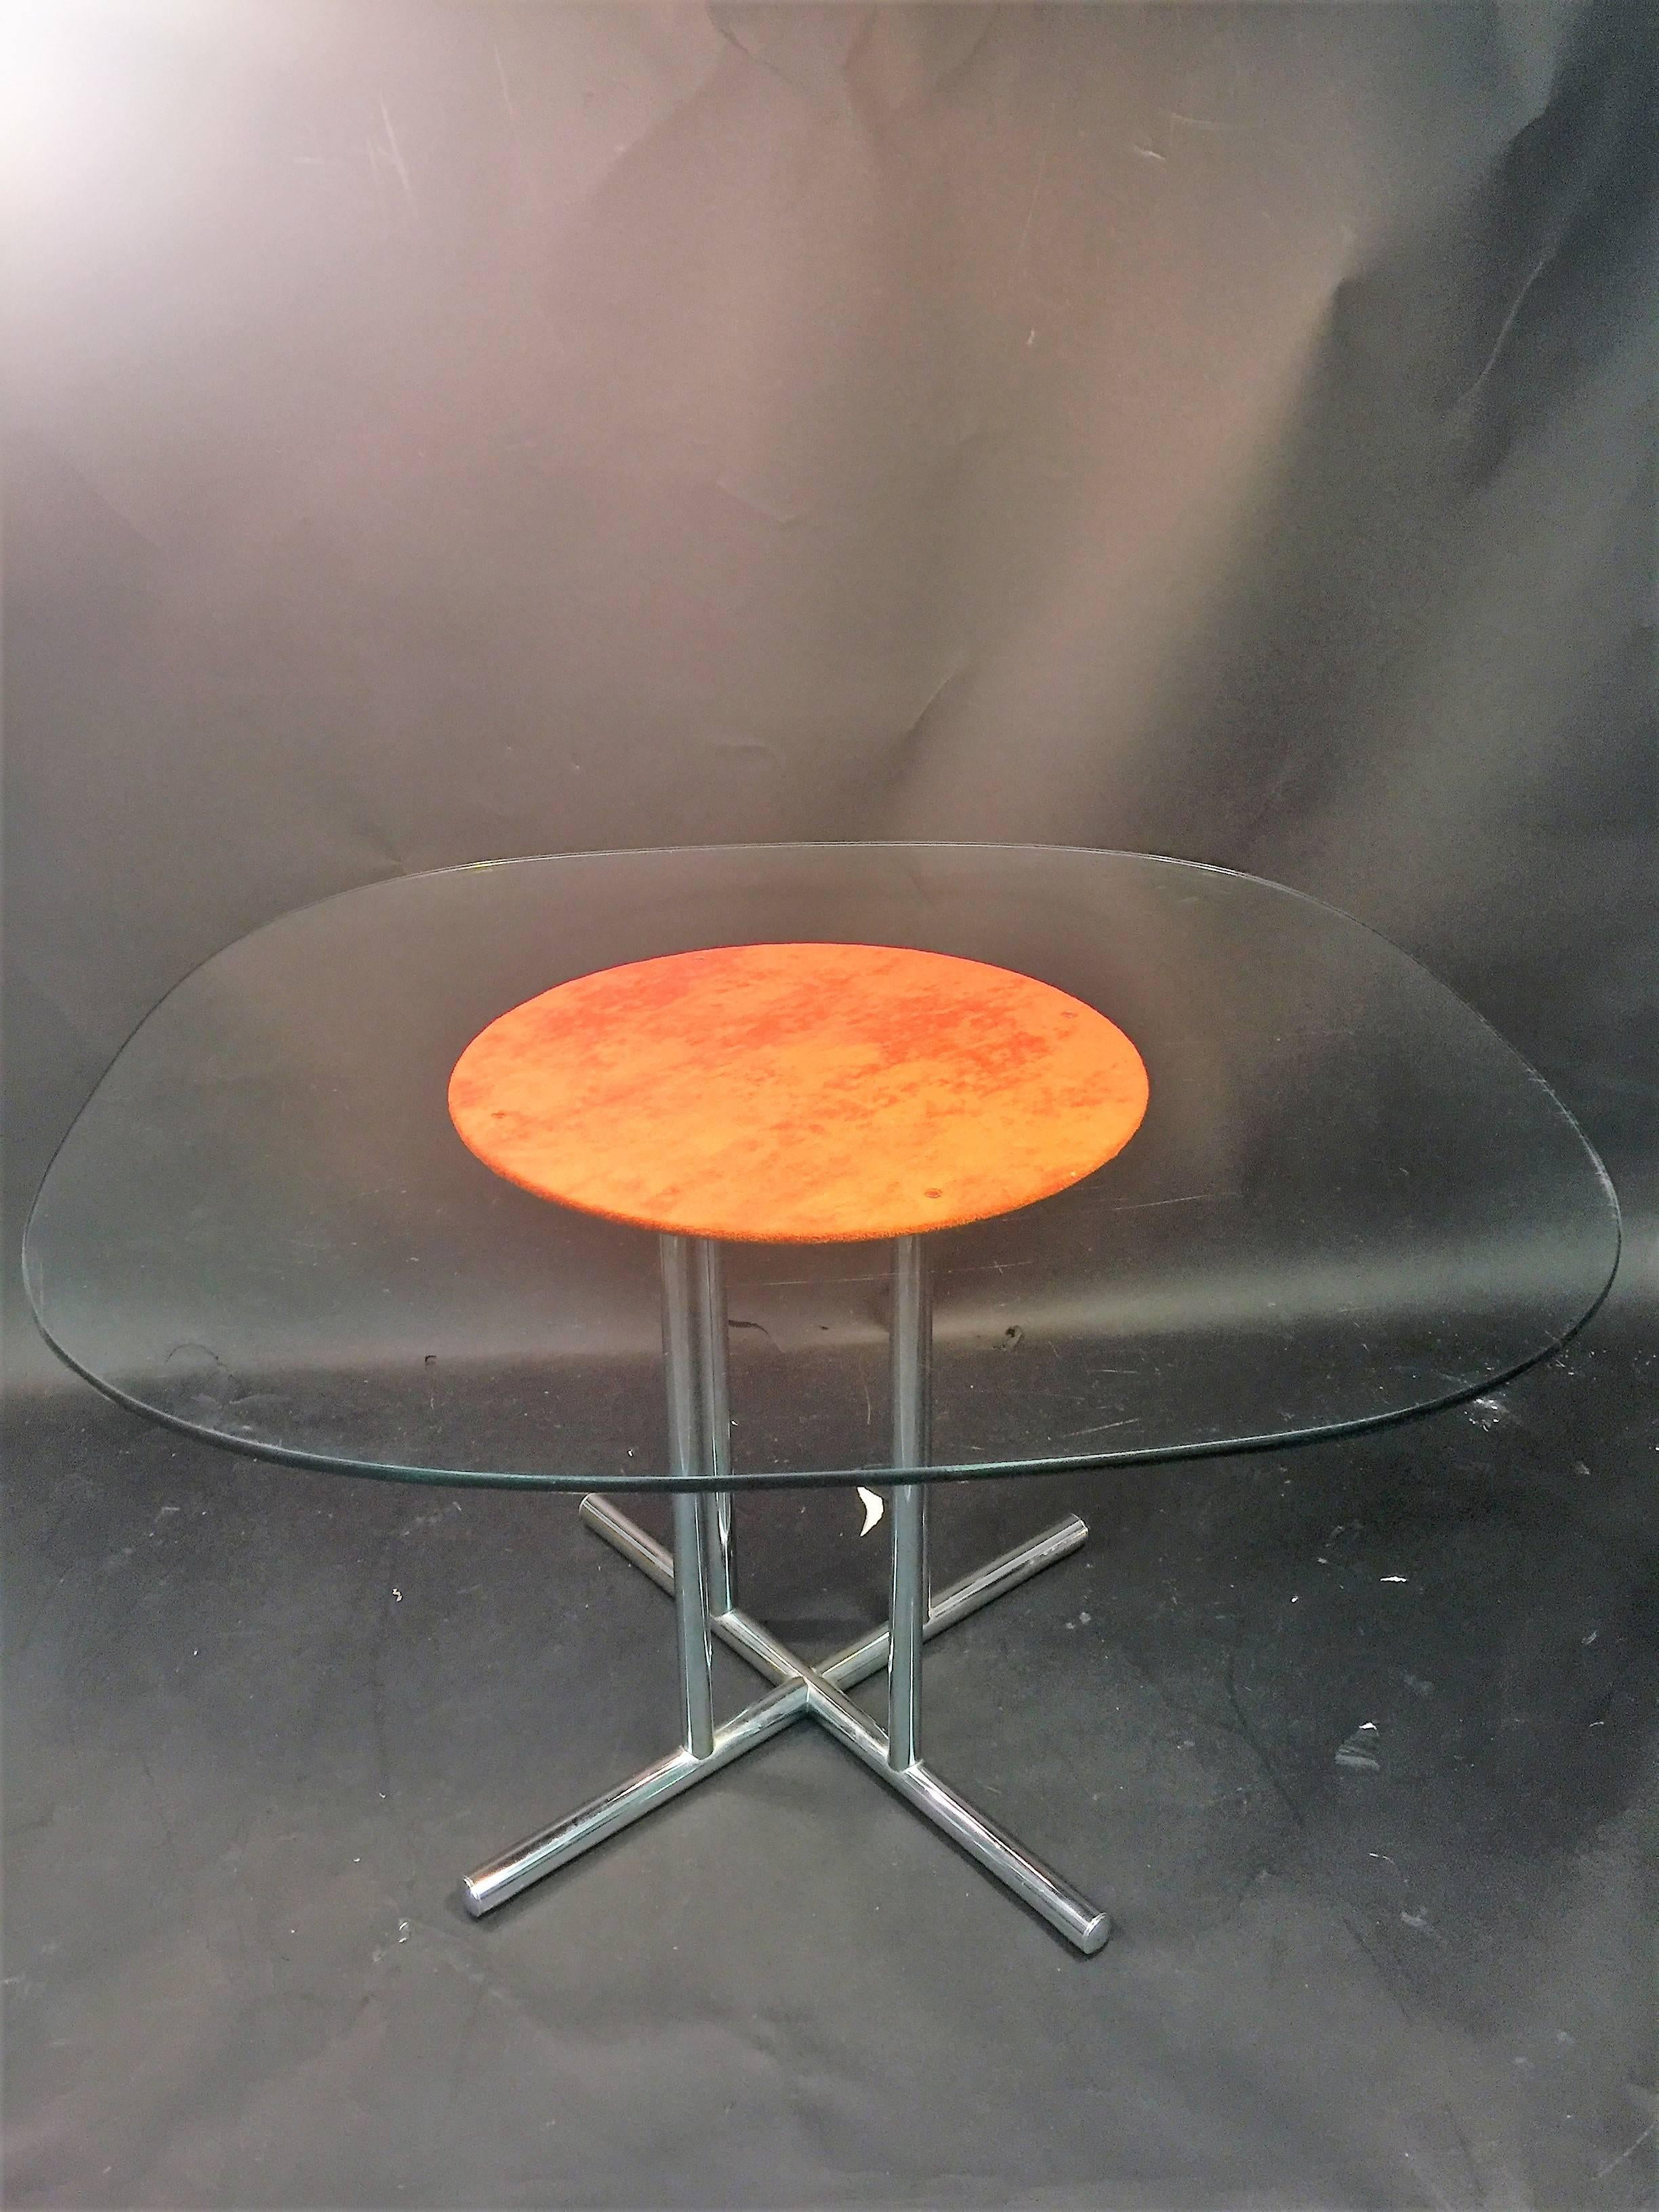 1970s beautiful original burnt orange velour ultra suede upholstered four dining chairs that swivel and are on beautiful chrome ball caster wheels. Great modernist tubular chrome design X-base dining table with the fabric circle inset design enhance